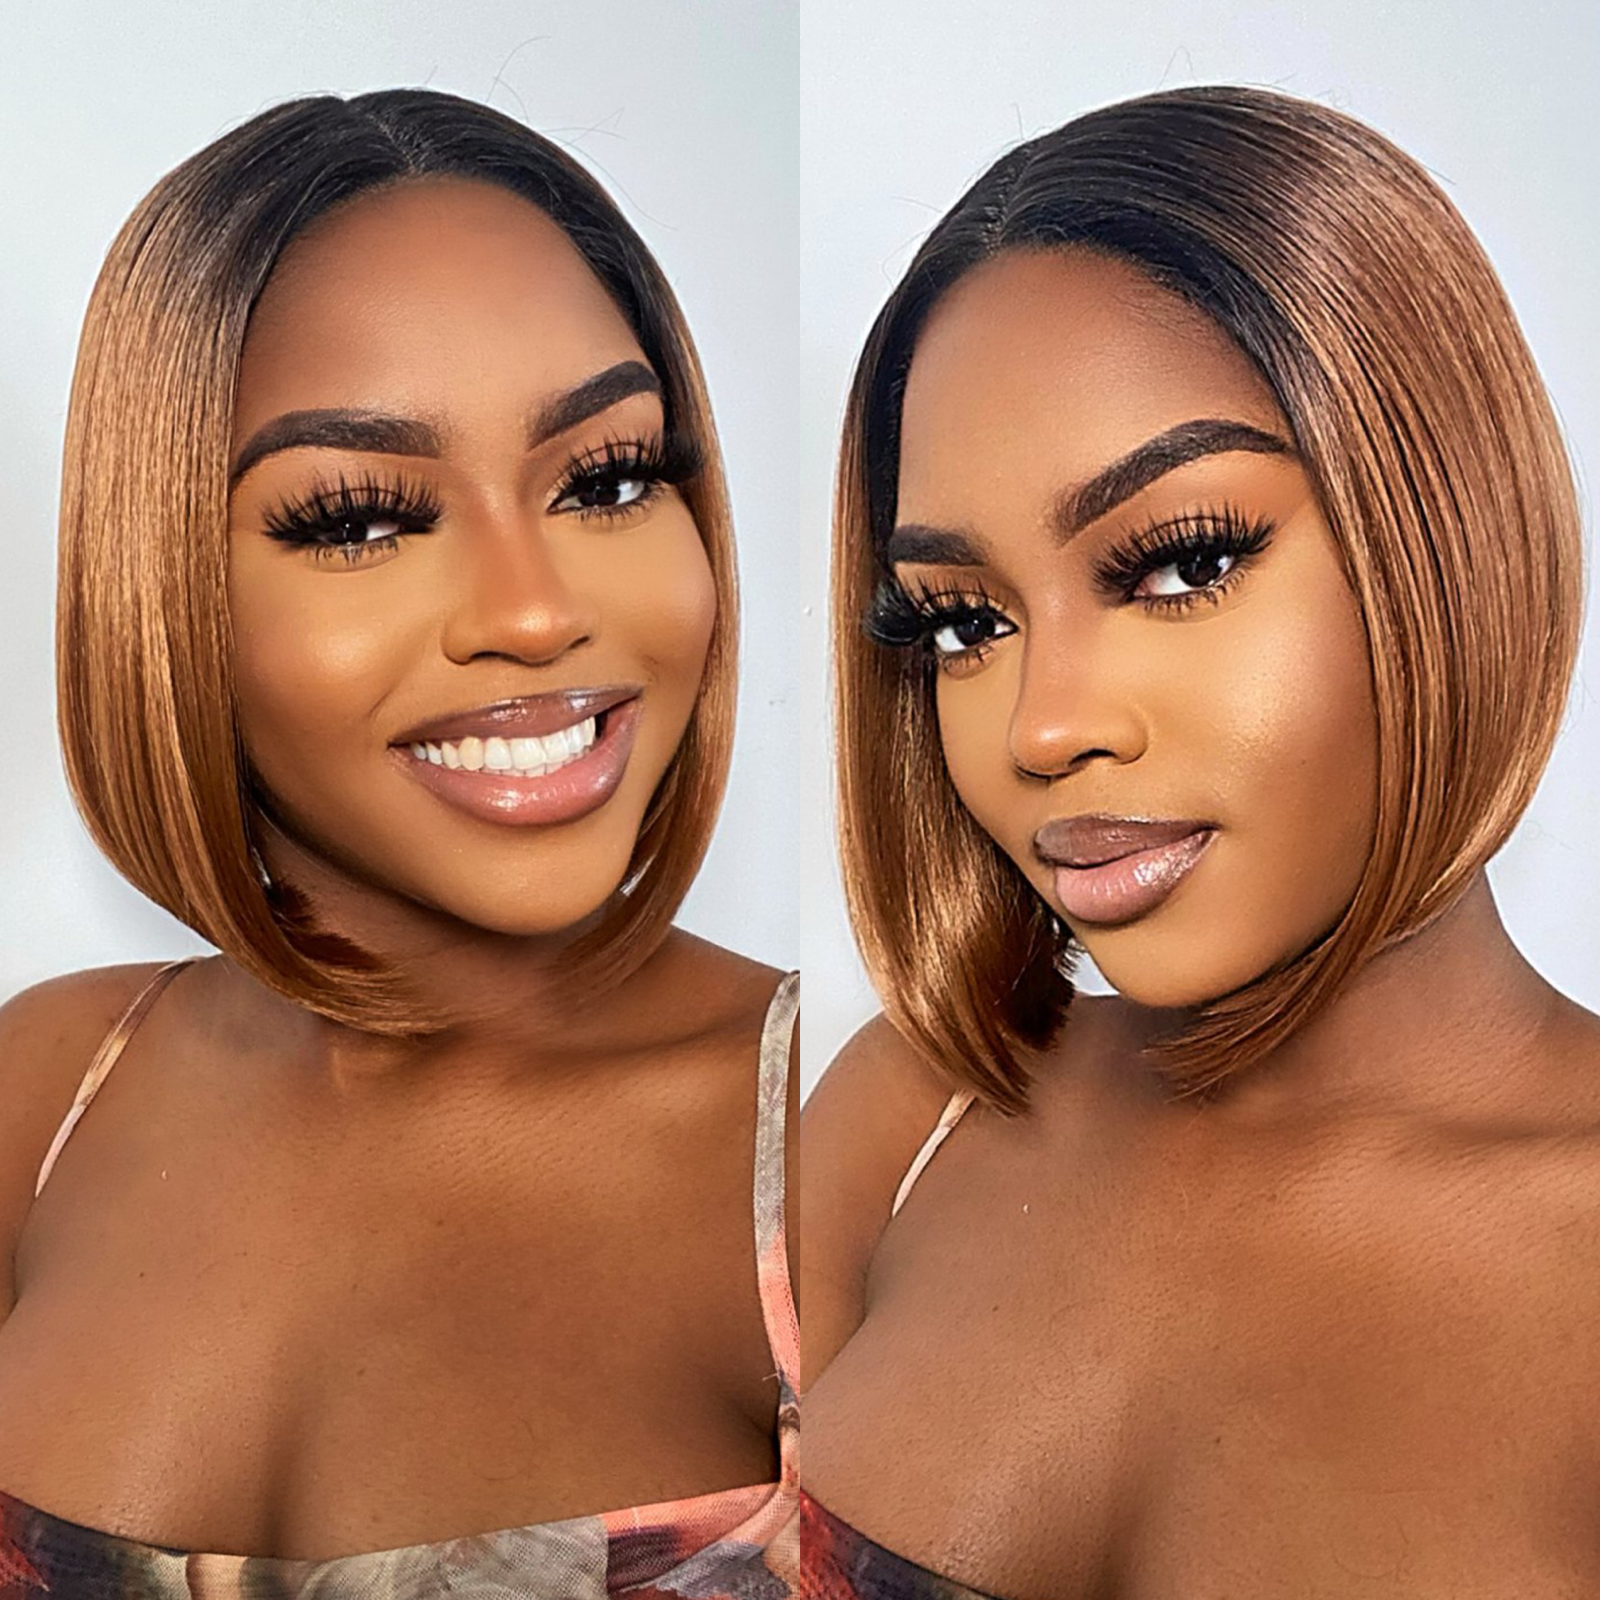 TOYOTRESS AIRY YAKI STRAIGHT T-MIDDLE PART LACE FRONT WIGS WITH BABY HAIR - 12 INCH BOB HUMAN HAIR RIVAL WIG OMBRE BROWN WITH BLACK ROOTS WIG(1027）